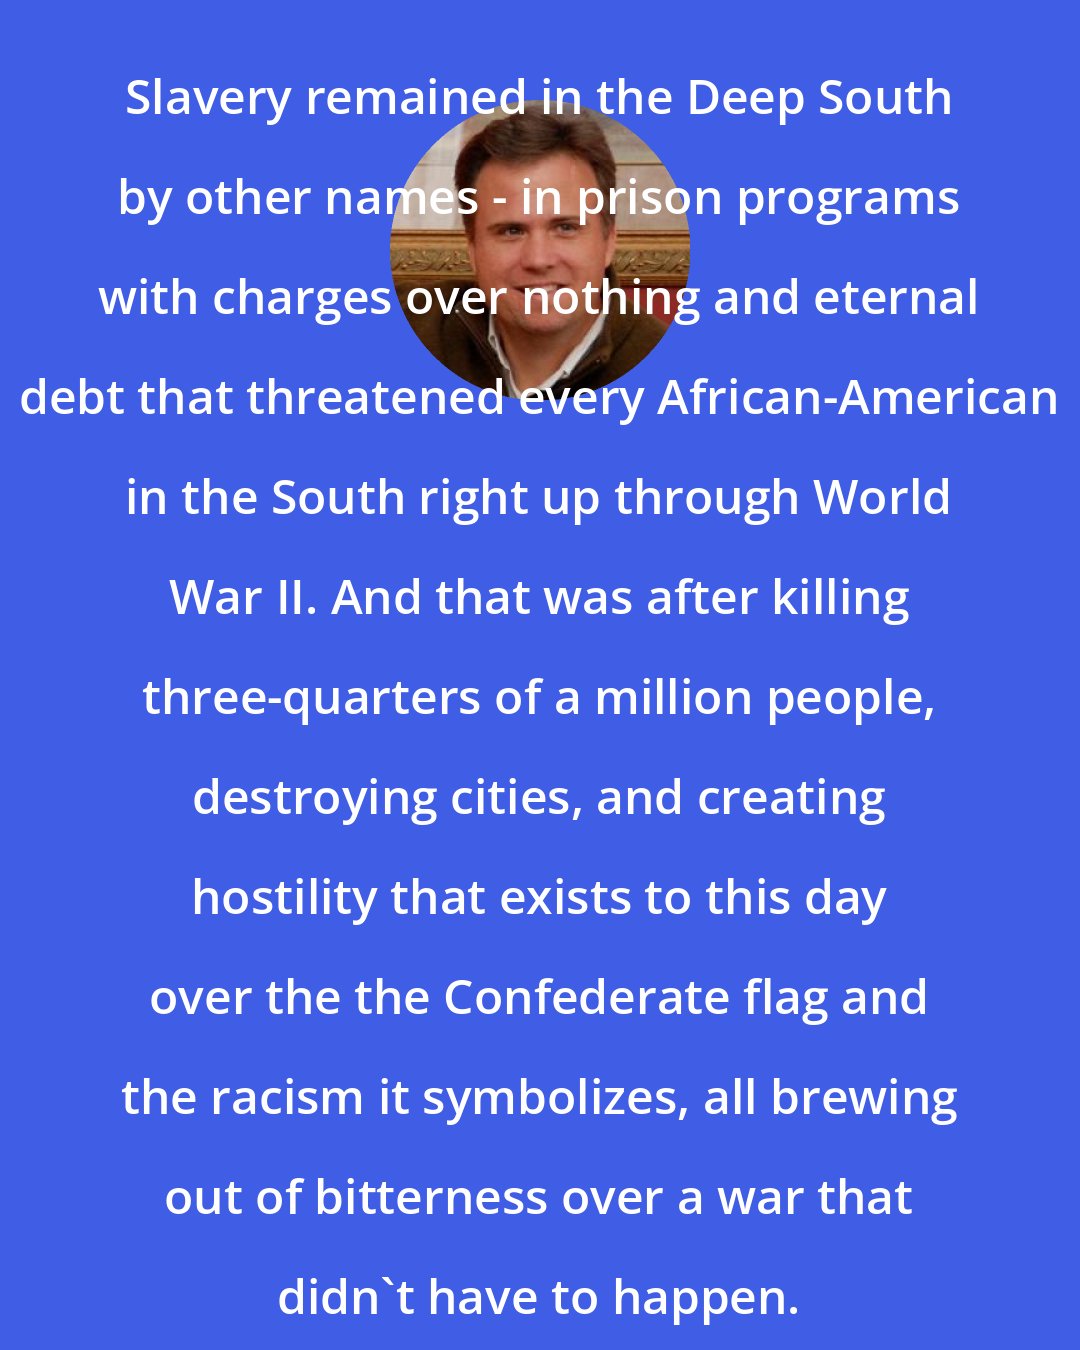 David Swanson: Slavery remained in the Deep South by other names - in prison programs with charges over nothing and eternal debt that threatened every African-American in the South right up through World War II. And that was after killing three-quarters of a million people, destroying cities, and creating hostility that exists to this day over the the Confederate flag and the racism it symbolizes, all brewing out of bitterness over a war that didn't have to happen.